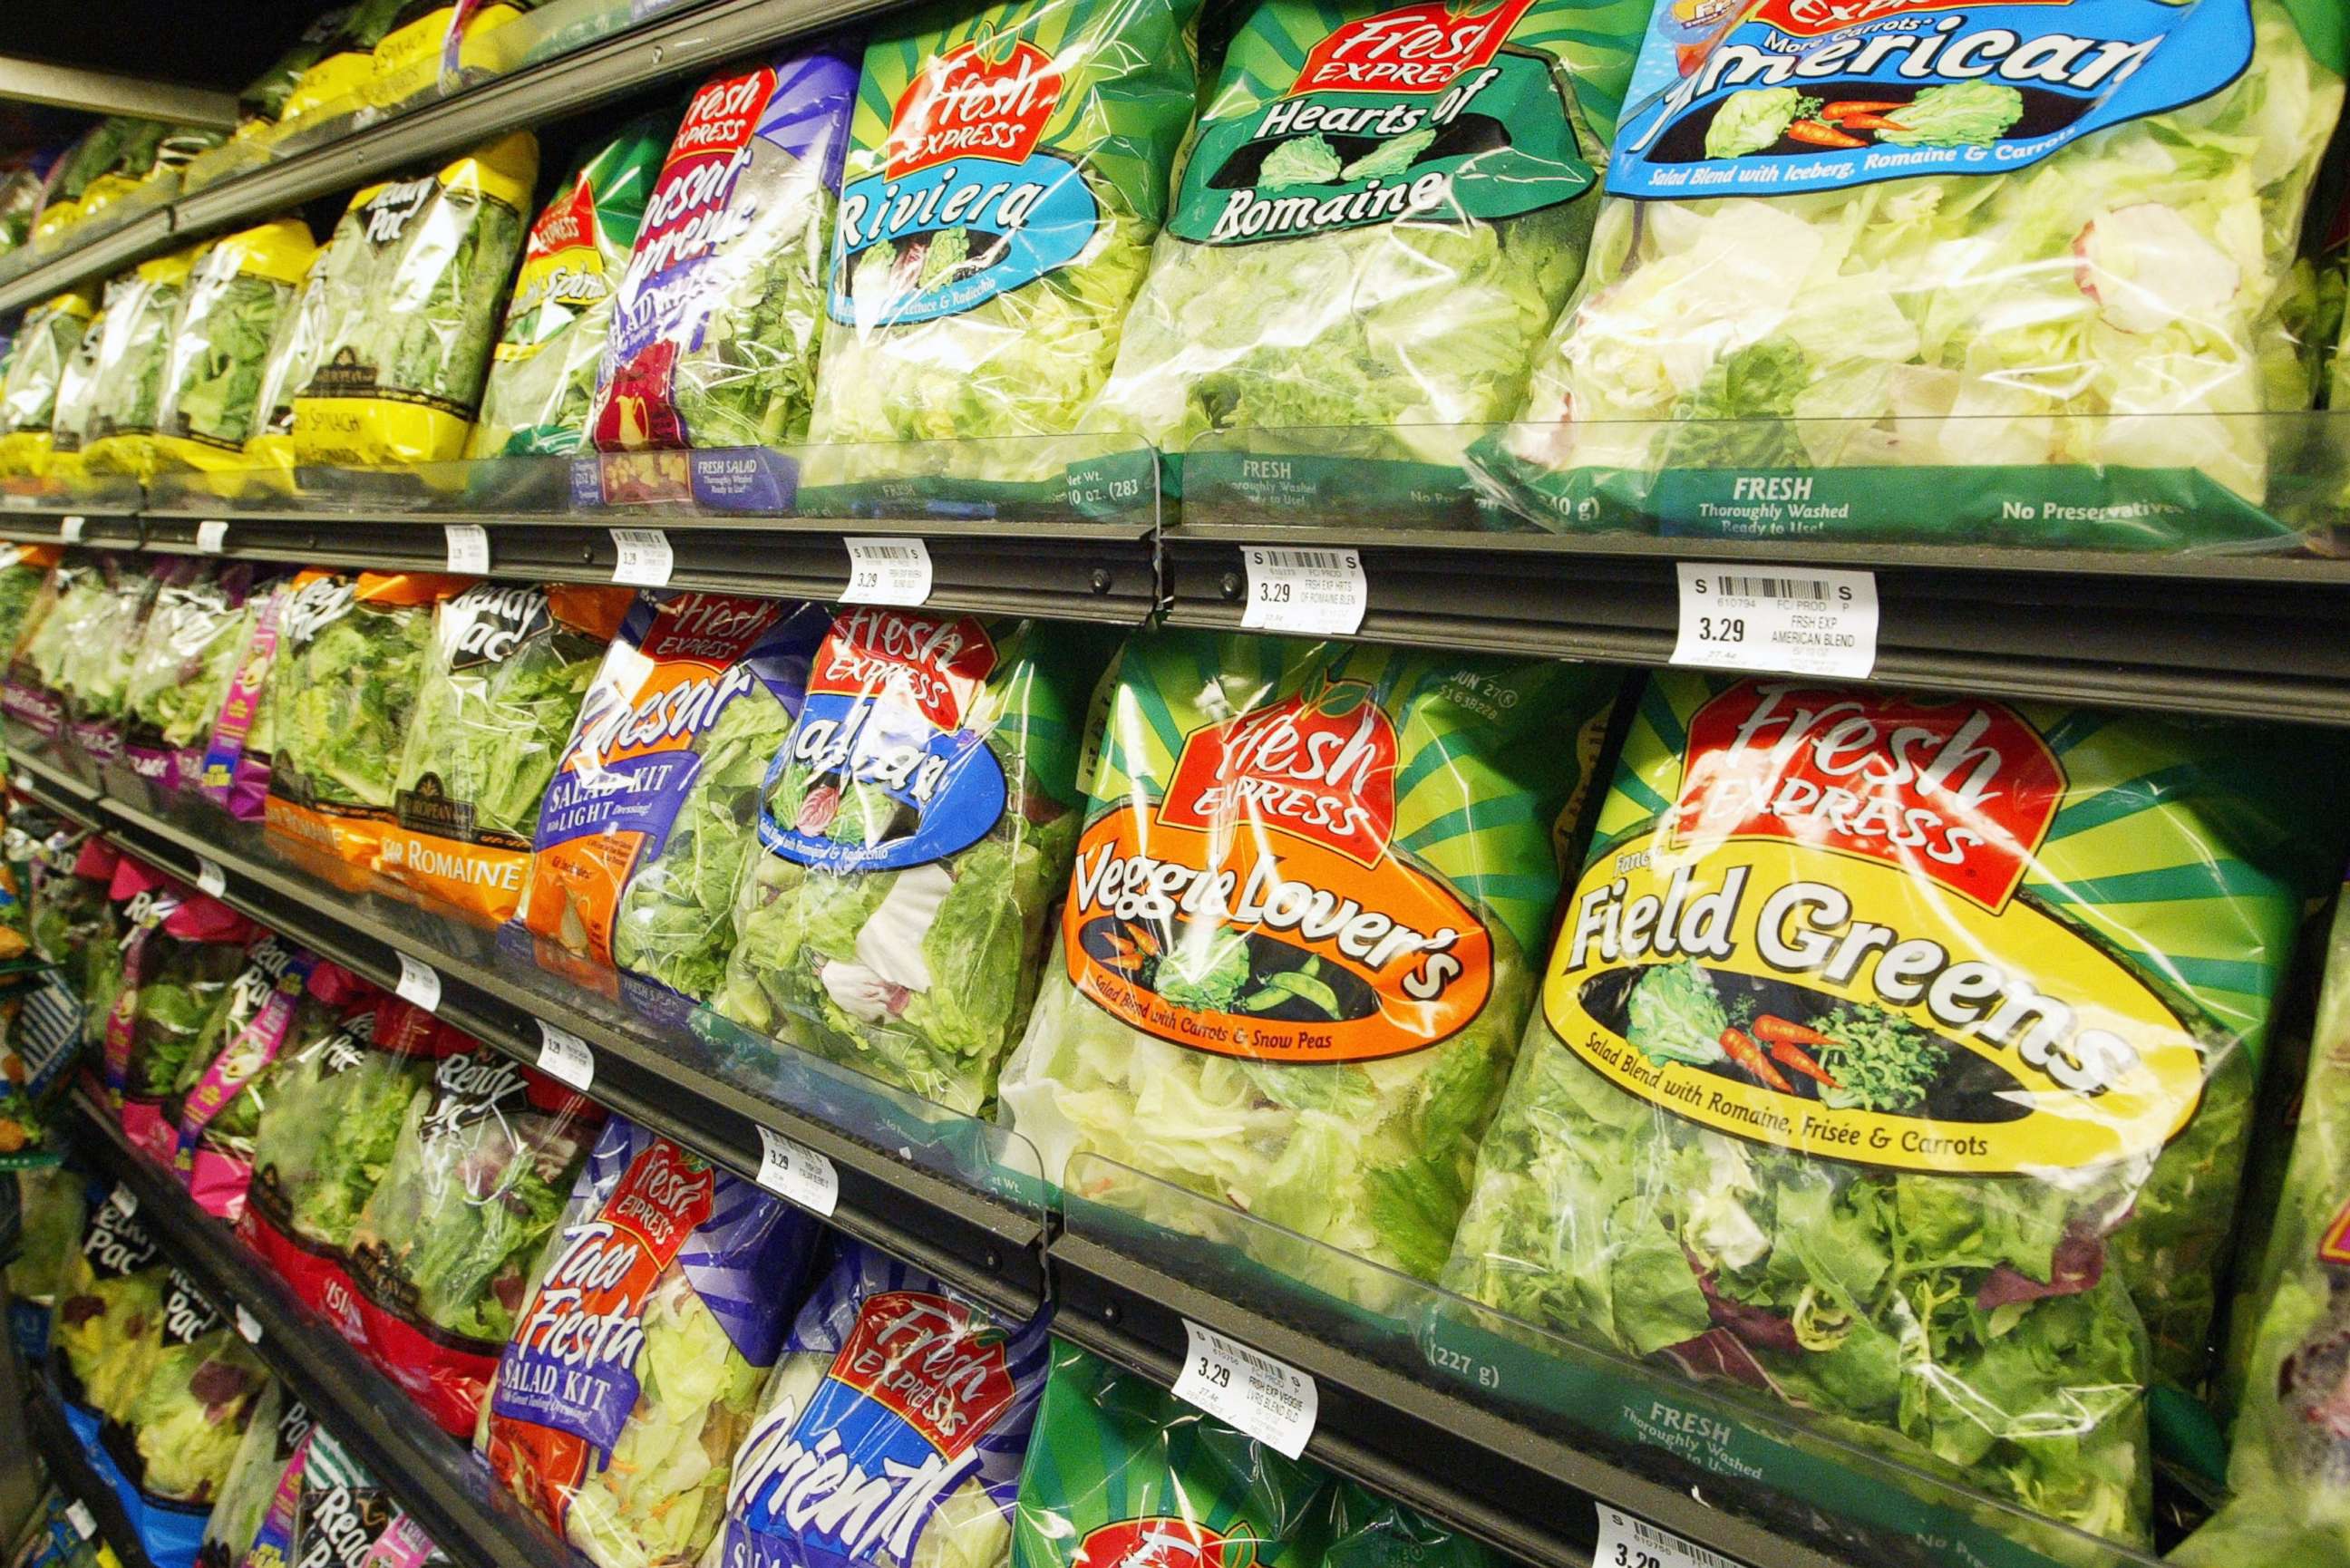 PHOTO: Fresh Express & Ready Pak Pre-Packaged salad sits on the shelf at a Bell Market grocery store June 19, 2003 in San Francisco.